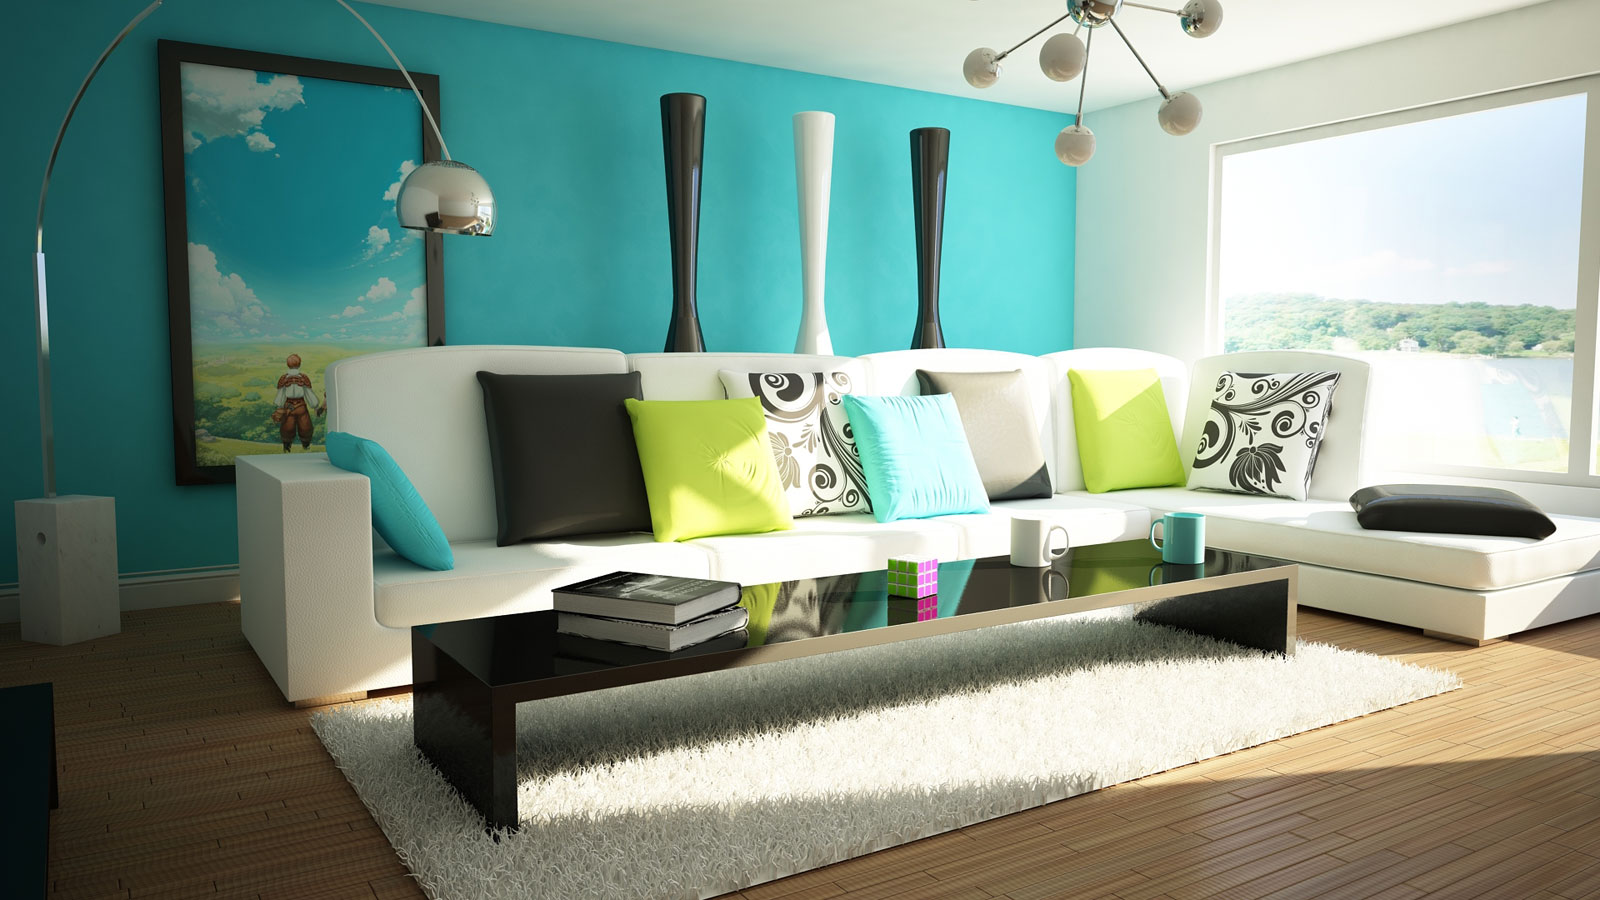 Living Room Applying Cool Living Room Color Ideas Applying Blue Accent Wall Color Completed With White Sofa Bed And Black Lounge Table On Soft Rug Also Furnished With Flooring Stand Lamp Living Room Find The Best Living Room Color Ideas